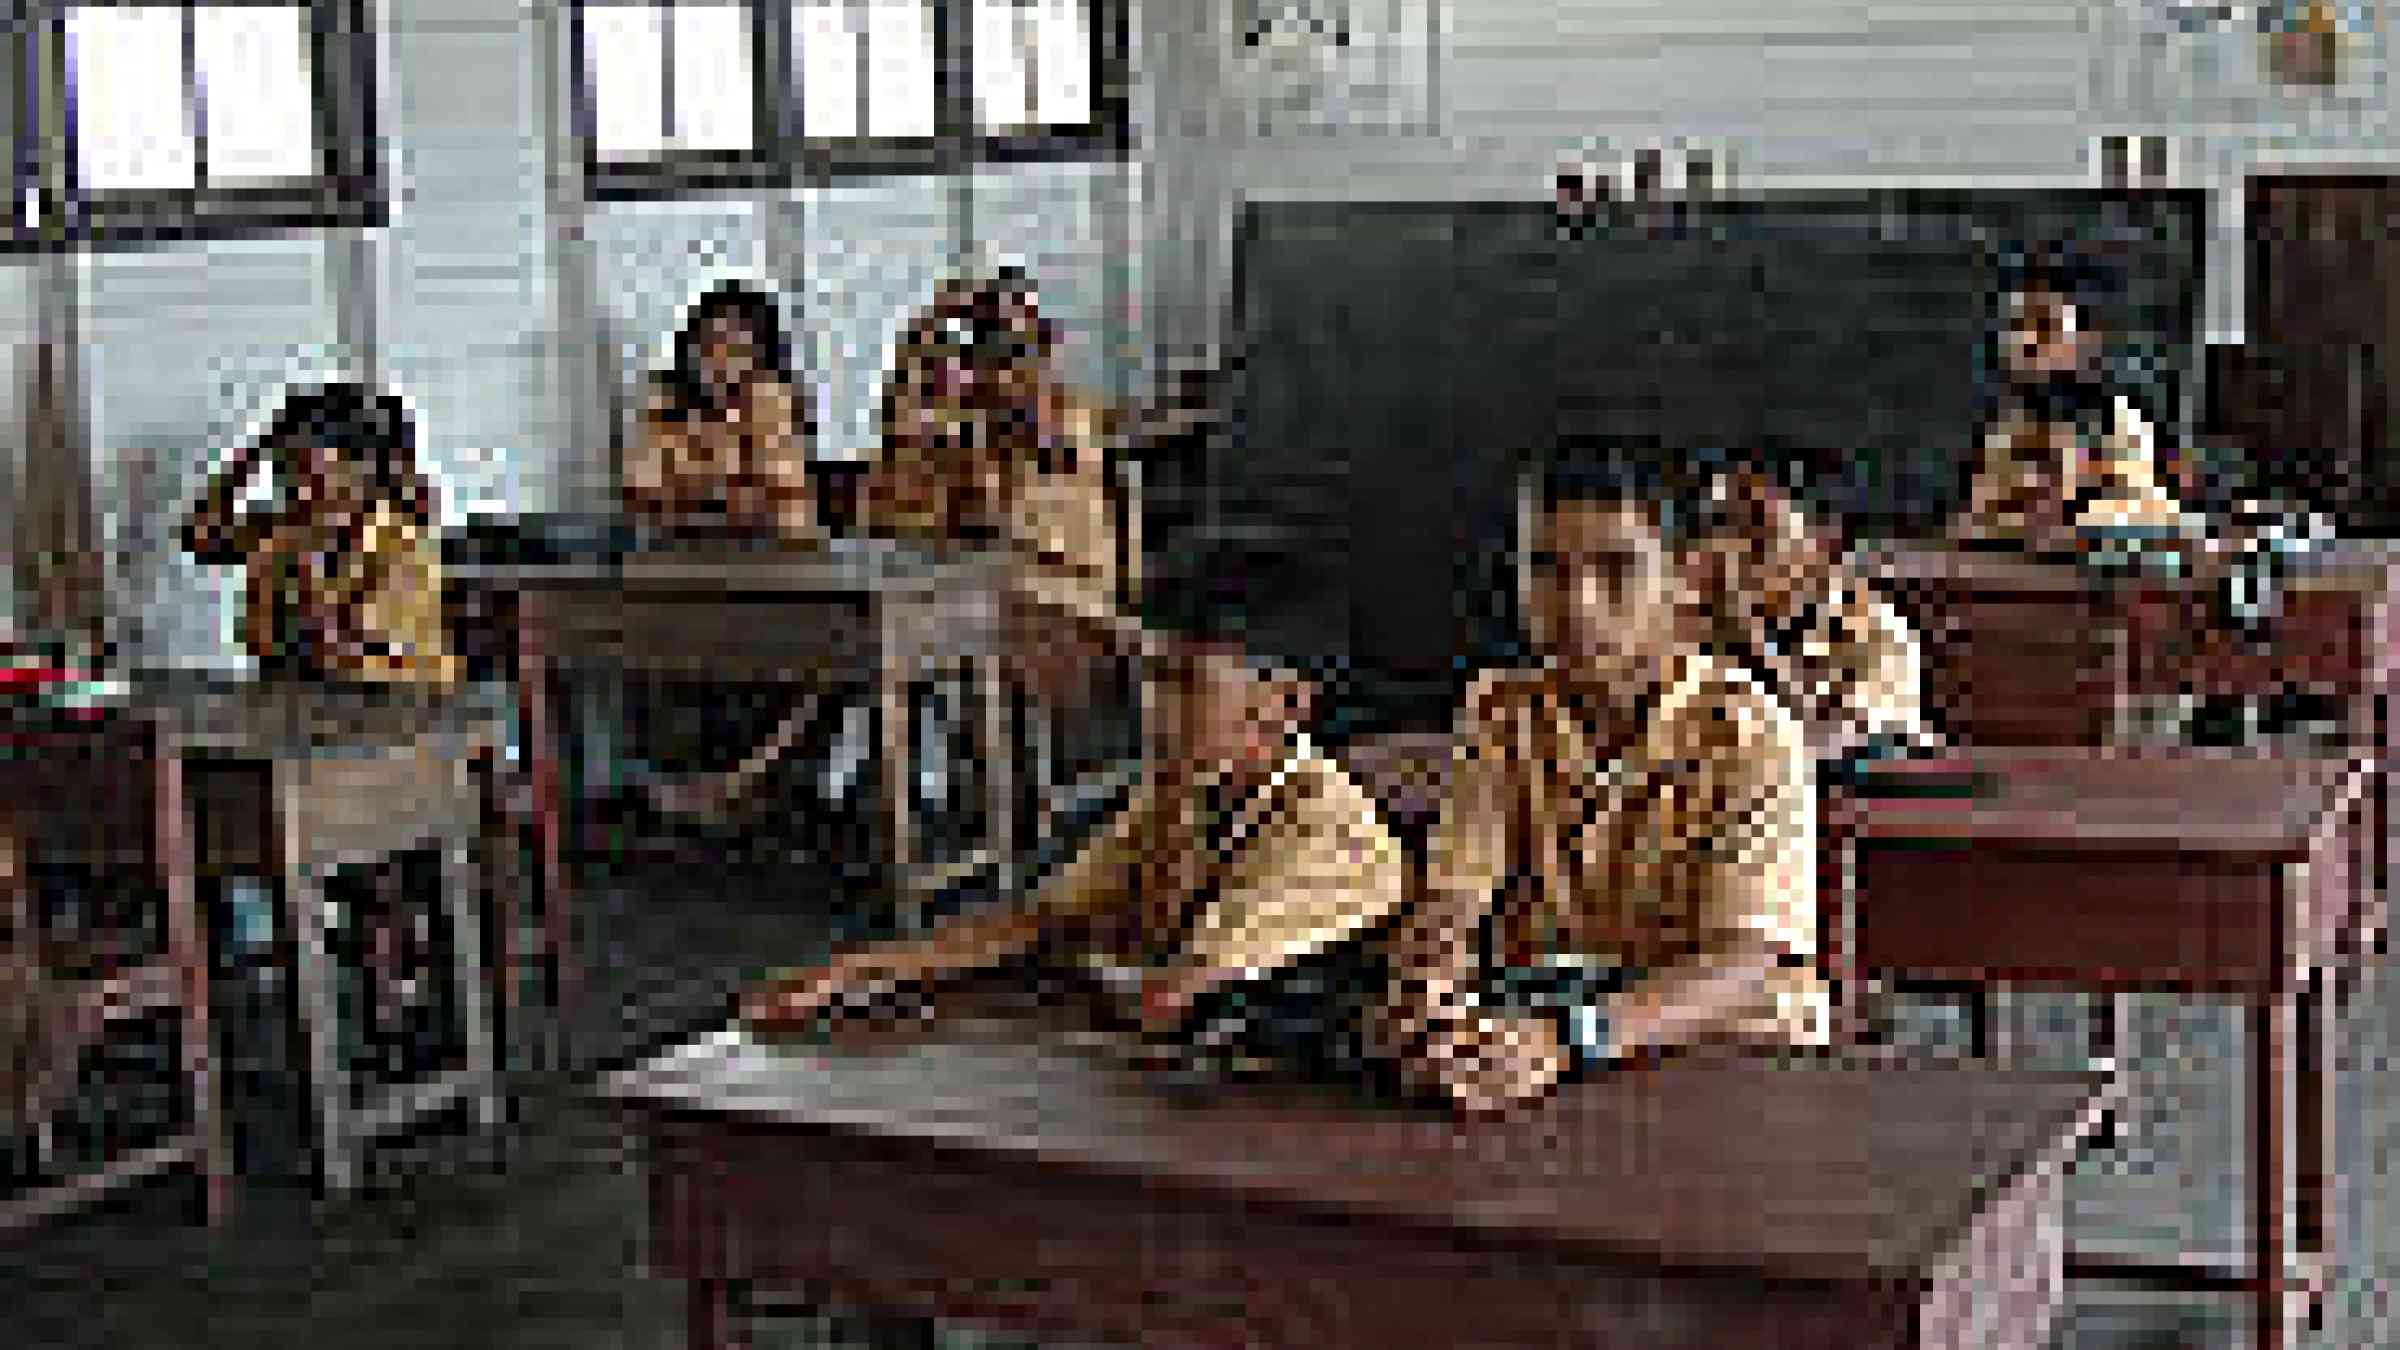 Photo of school children in Indonesia by Flickr user, JKPrime, Creative Commons Attribution-NonCommercial-ShareAlike 2.0 Generic, http://www.flickr.com/photos/starshun/32841697/